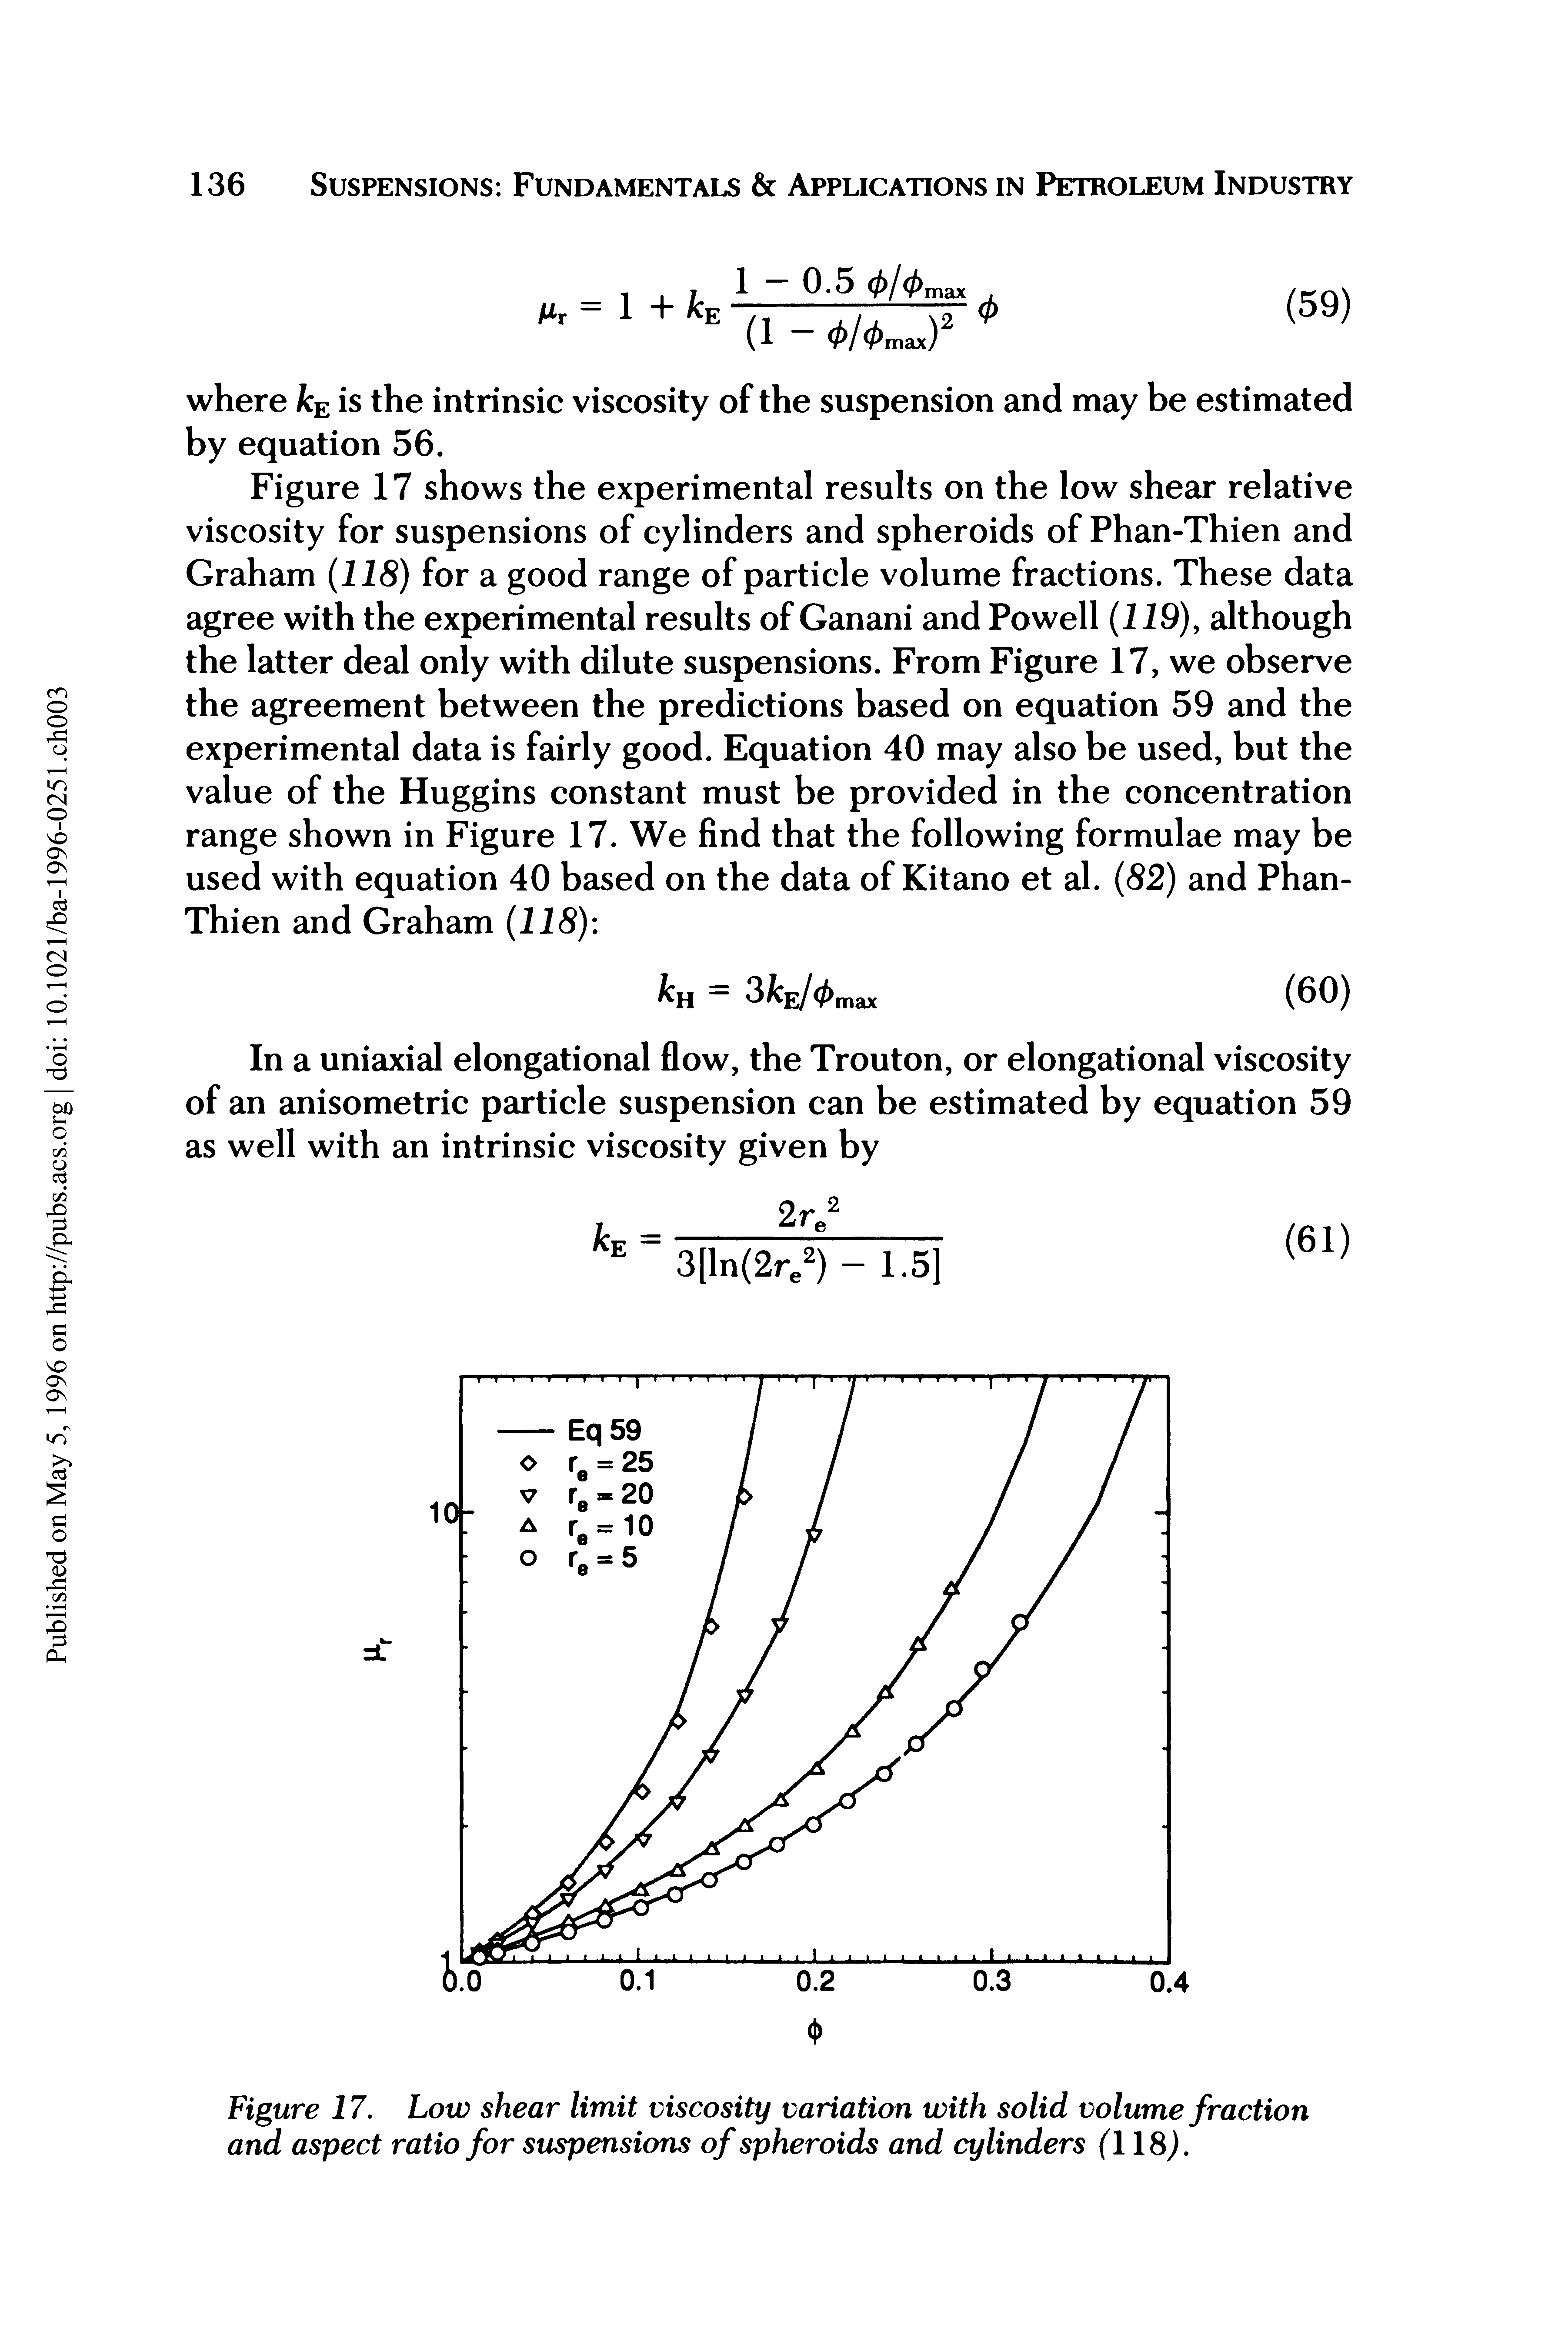 Figure 17. Low shear limit viscosity variation with solid volume fraction and aspect ratio for suspensions of spheroids and cylinders (118).